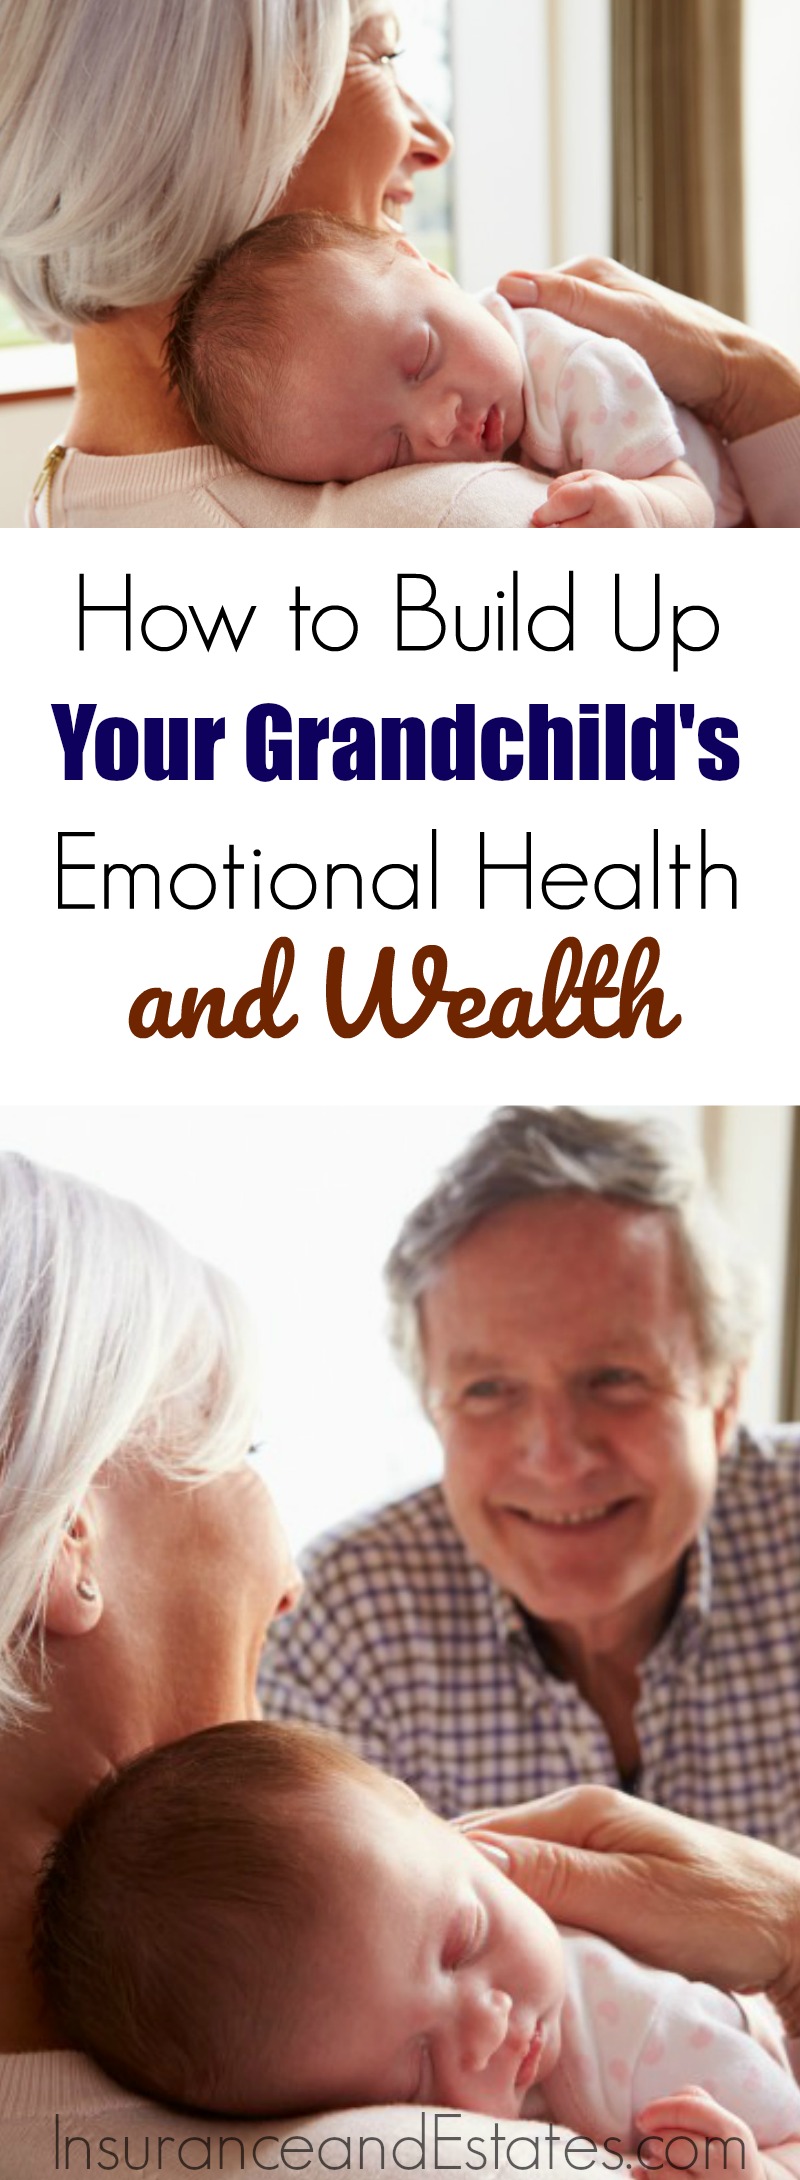 How to Build Up Your Grandchild's Emotional Health and Wealth and help them prepare for life's challenges